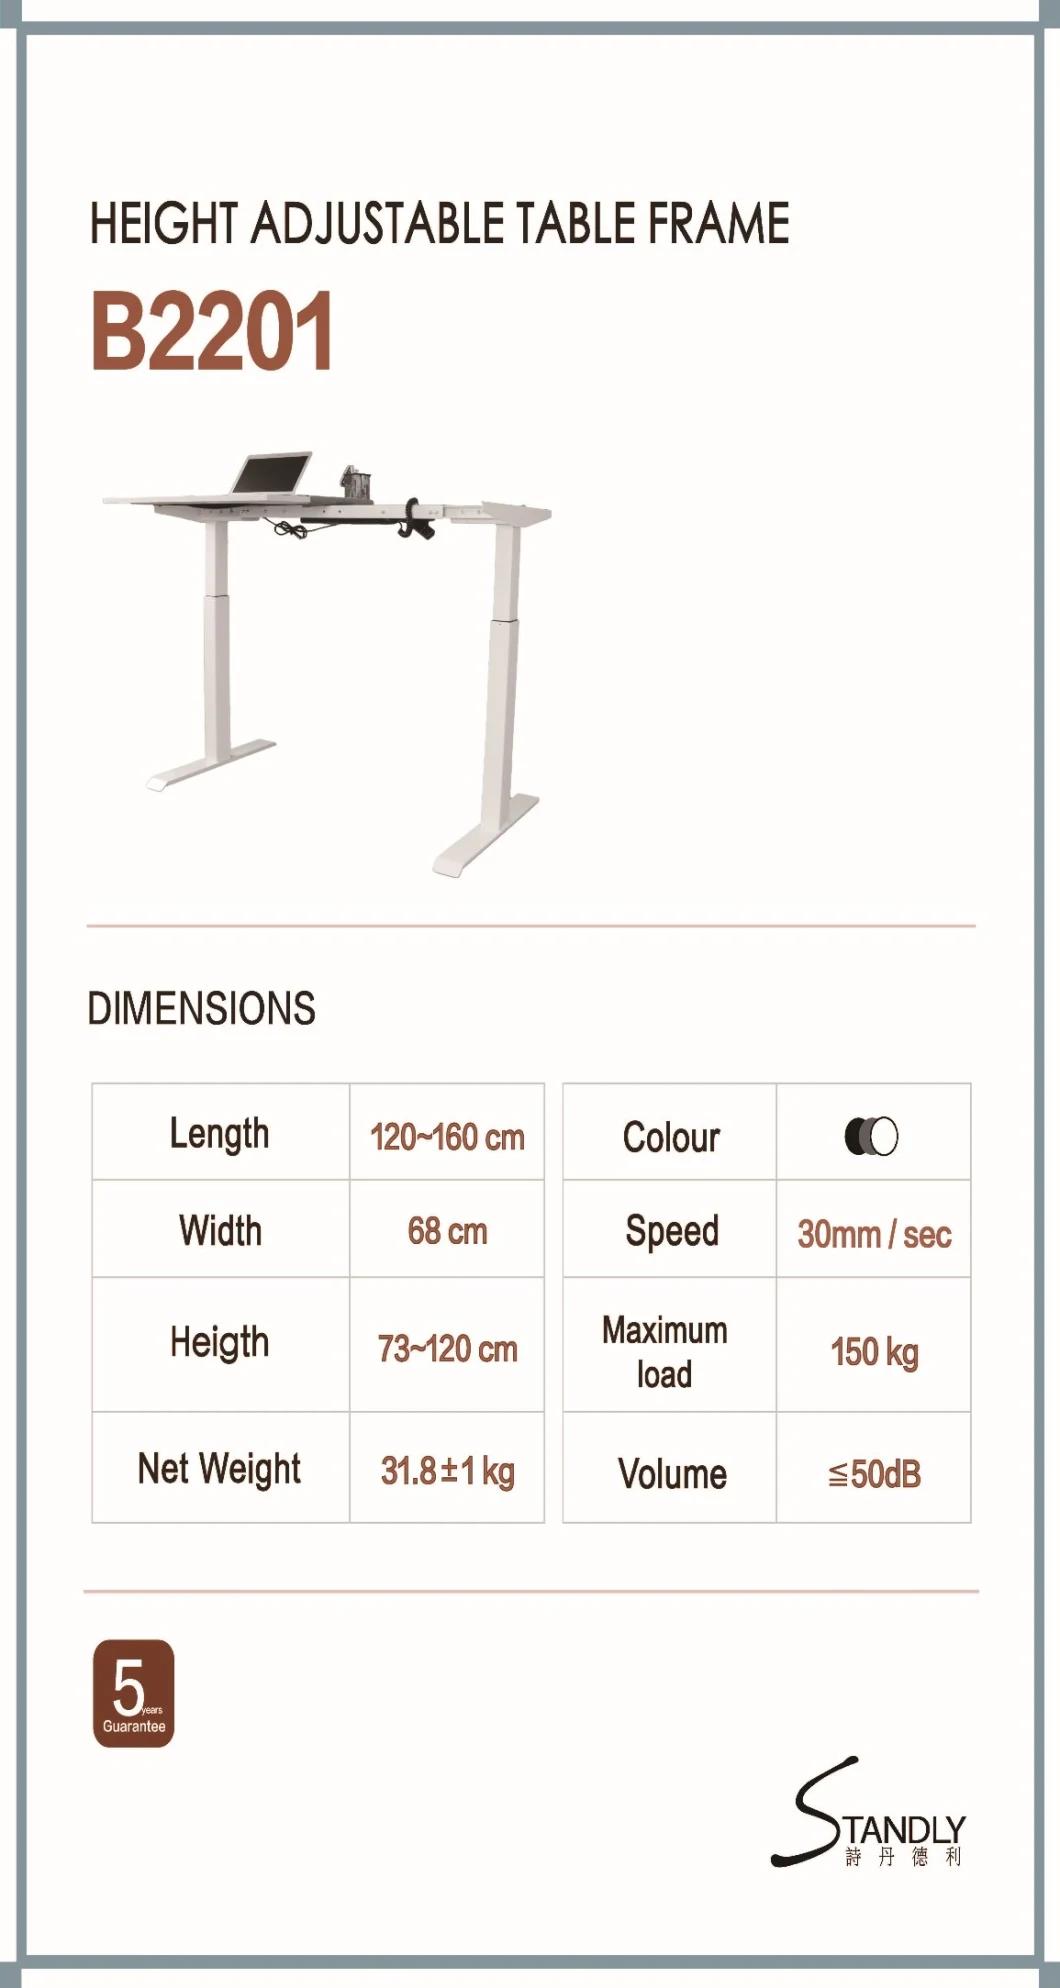 Stand up Computer Desk Desk Office Bracket Intelligent Height Adjustable Table Automatic Electric Lifting Table Desktop Table Home